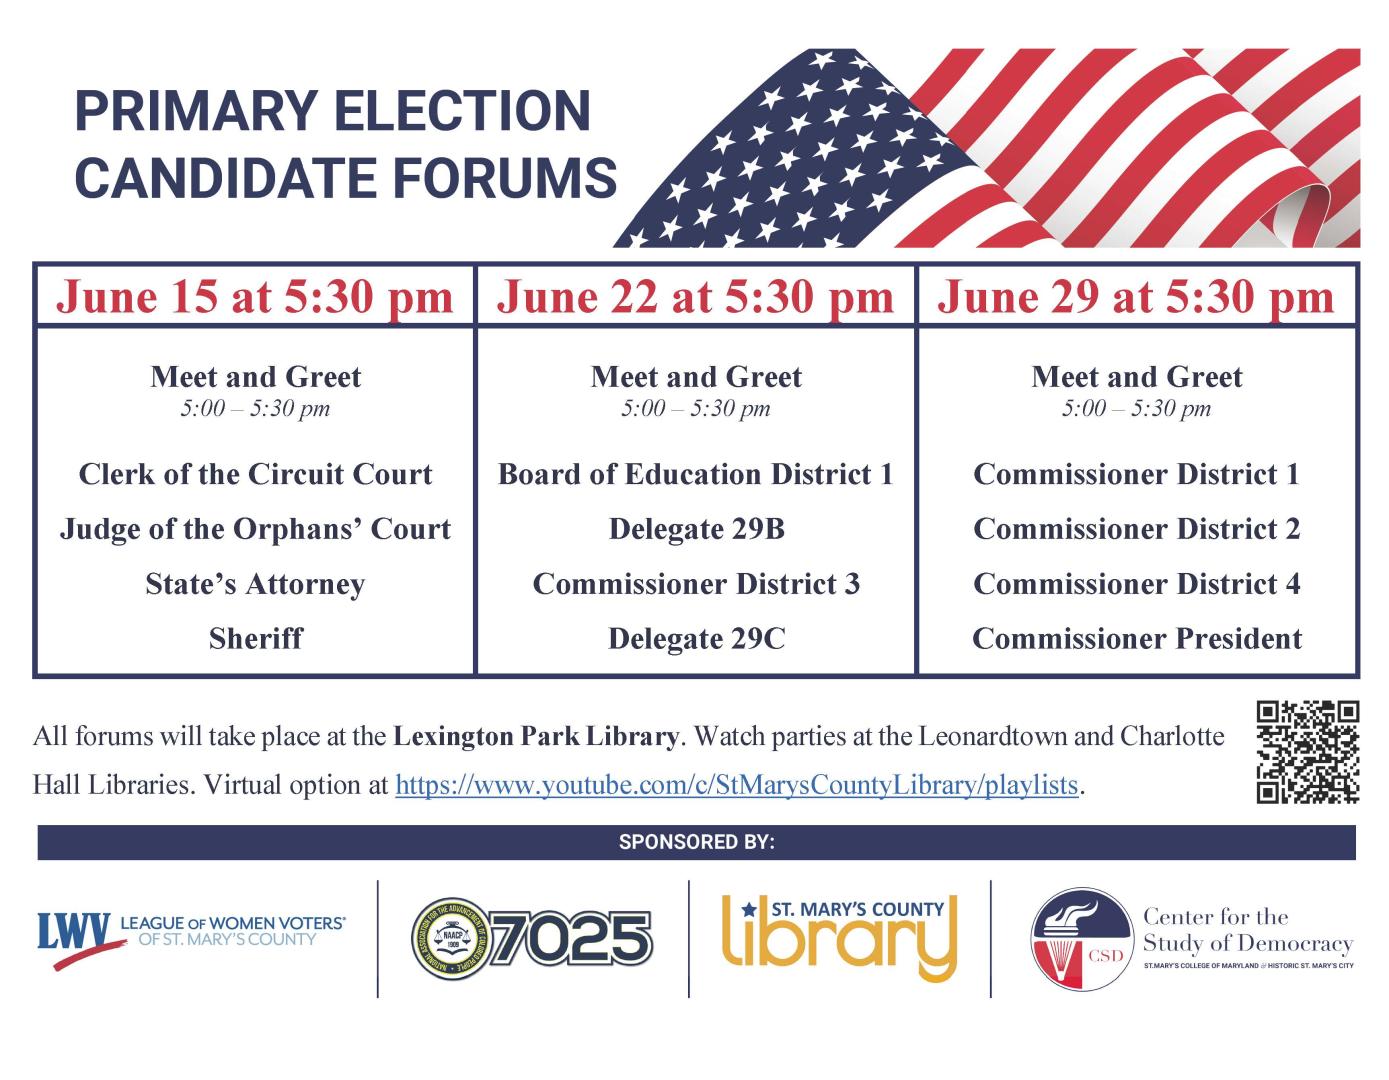 graphic of candidate forum schedule June 15, 22 and 29